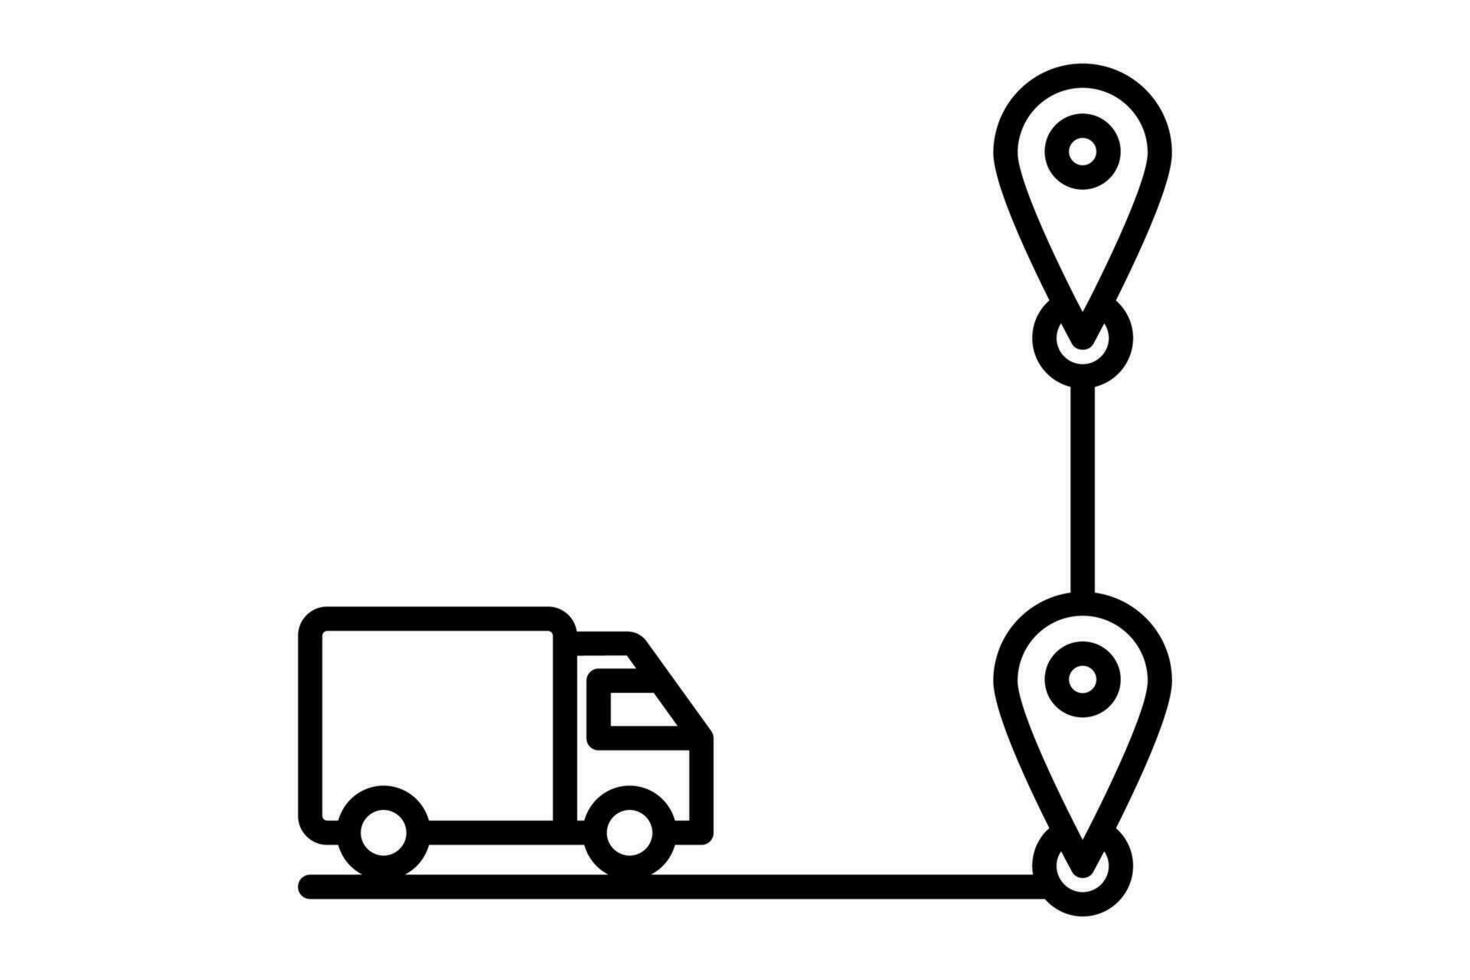 Route Delivery Icon. Icon related to Delivery. suitable for web site, app, user interfaces, printable etc. Line icon style. Simple vector design editable